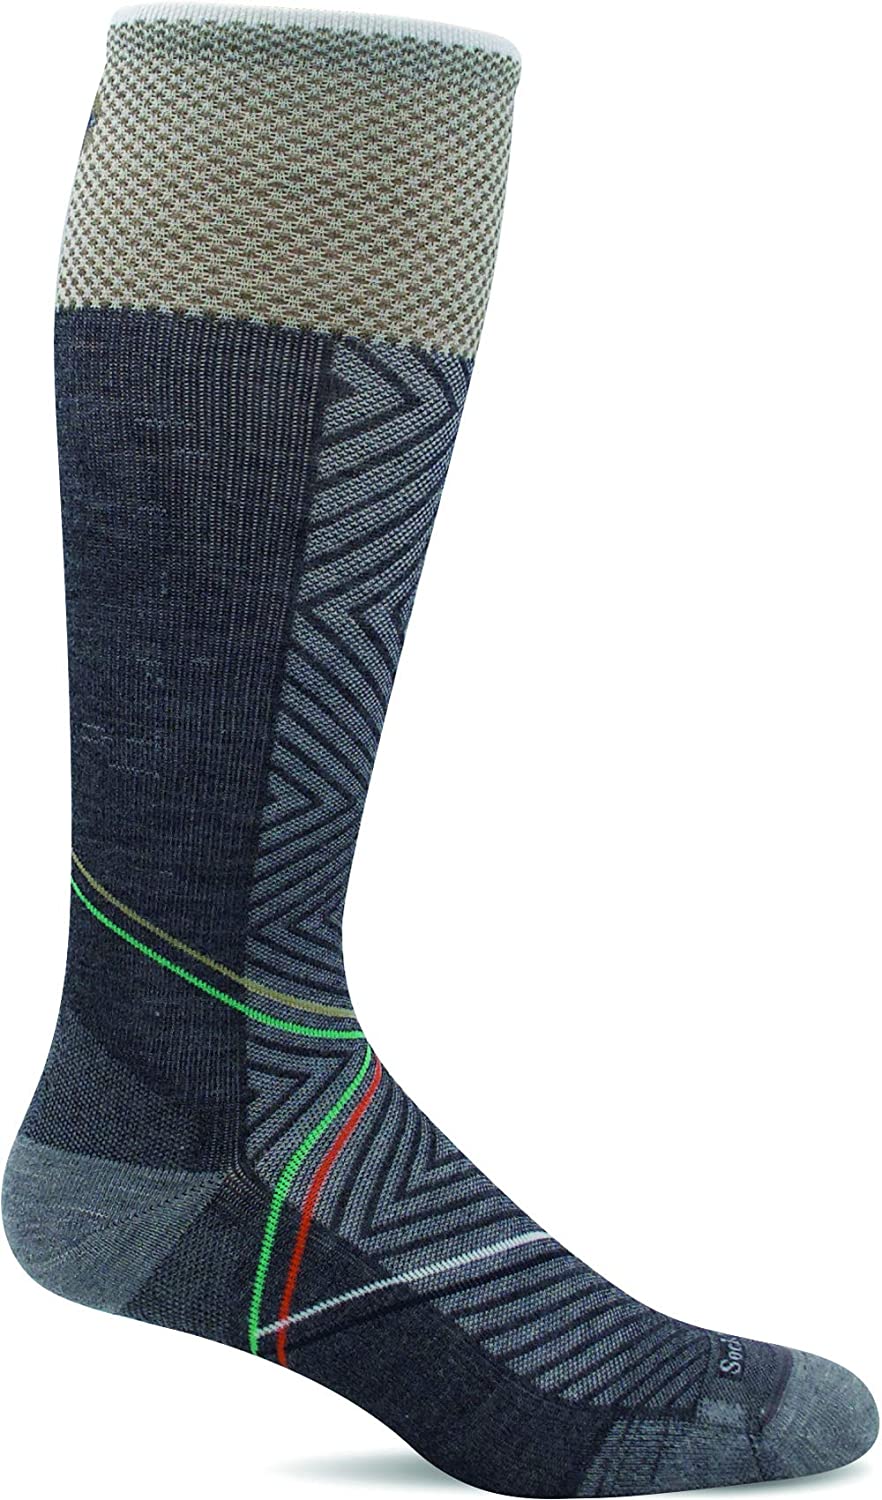 Sockwell Women's Pulse Graduated Compression Sock in Charcoal from the side